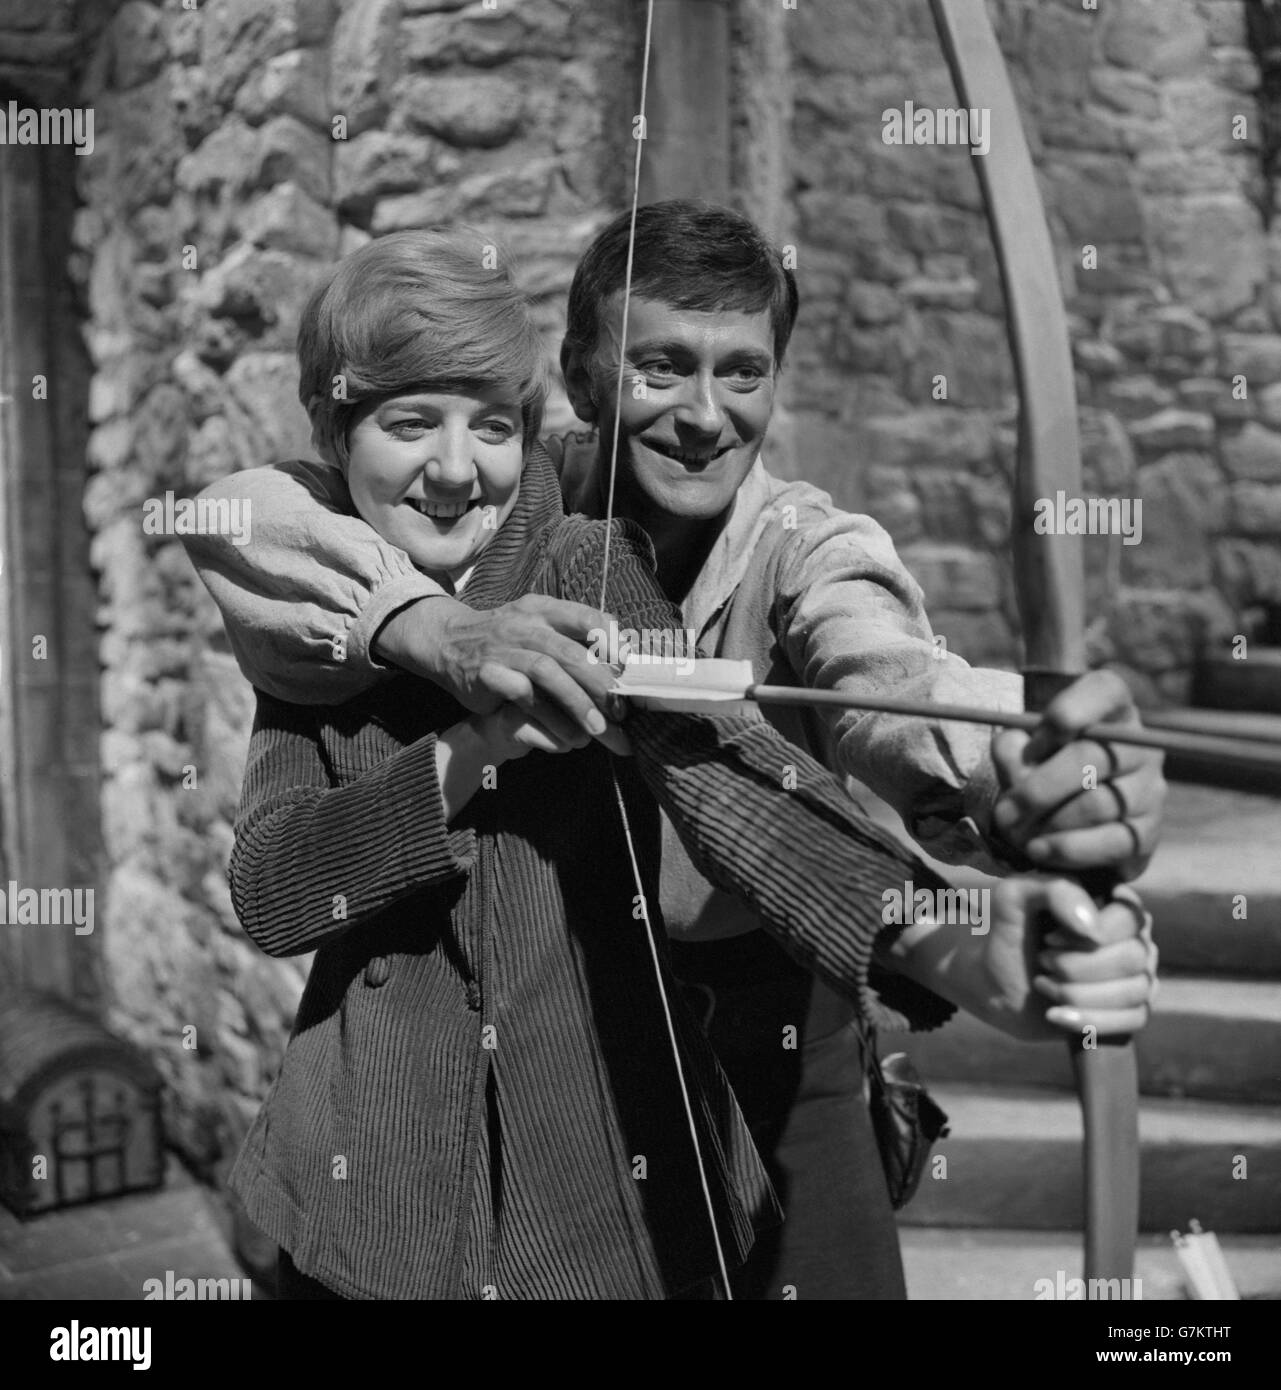 Hood, alias actor Barrie Ingham, shows pop star, Cilla Black, how to use a bow and arrow. Barrie plays the legendary outlaw of Sherwood Forest in "A Challenge for Robin Hood",